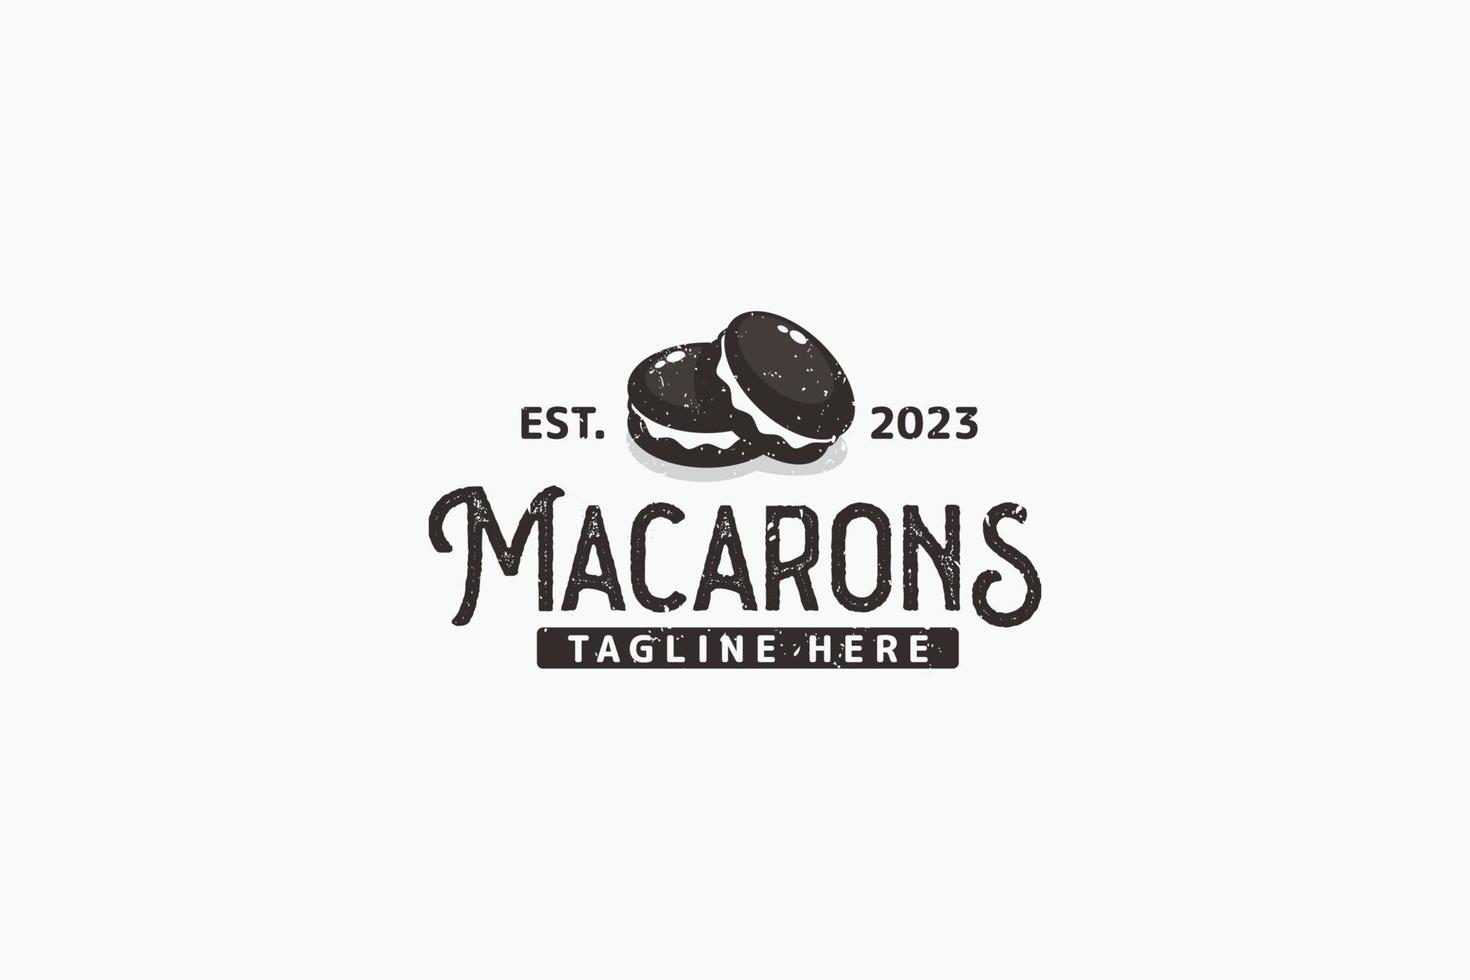 macarons logo in vintage style for any business, especially patisserie, bakery, cafe, etc. vector